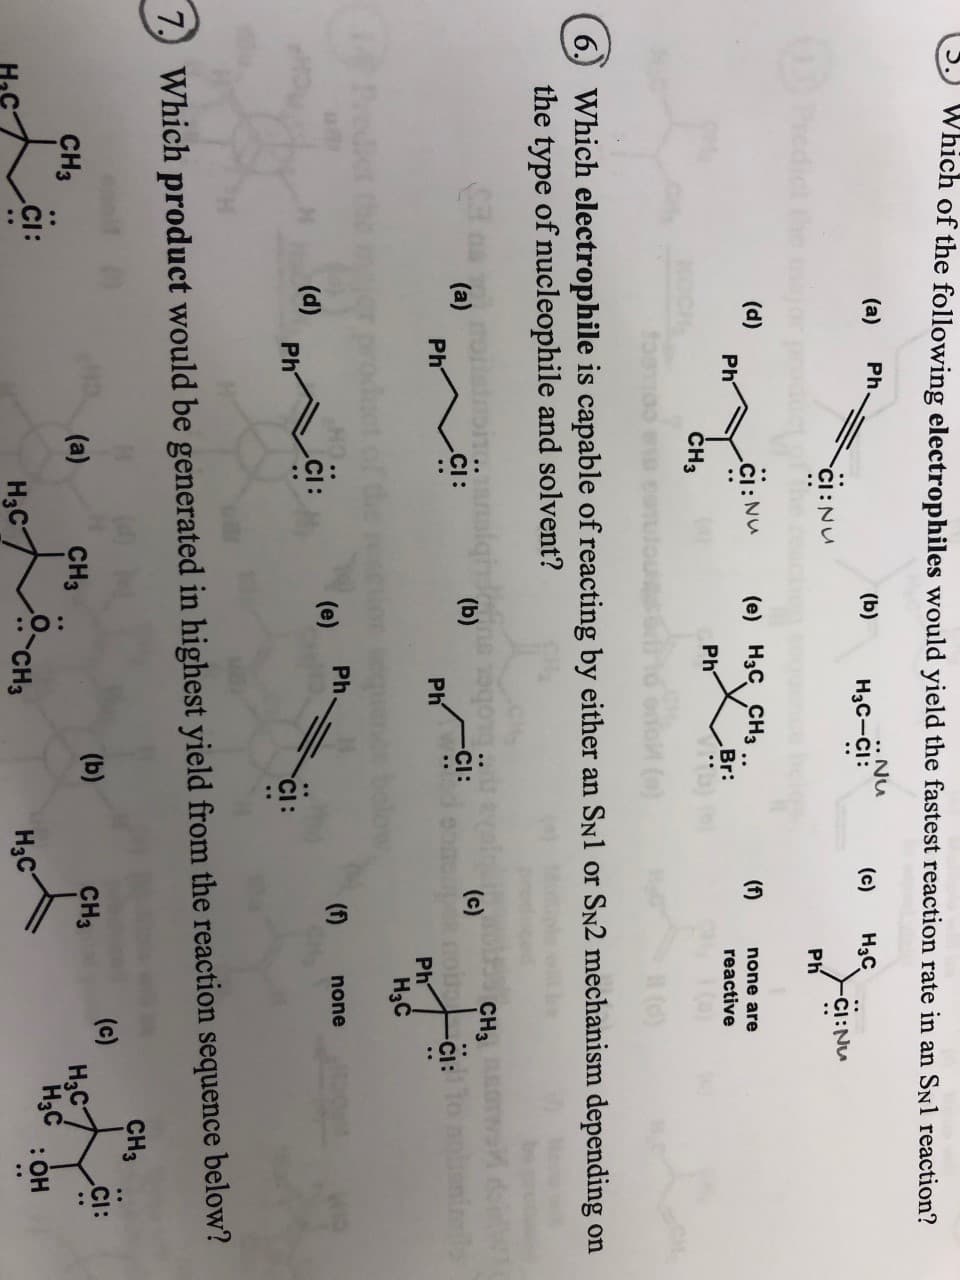 Which of the following electrophiles would yield the fastest reaction rate in an SNl reaction?
(a)
Ph
(b)
.. Nu
(c)
Нас
CI:Nu
Нас—Ci:
CI: Nu
edict he
Ph
(d)
Ph
.Cl: Nu
(е) Нзс Снз
(f)
none are
Br:
reactive
Ph
CH3
(e)
()
6
Which electrophile is capable of reacting by either an SNl or SN2 mechanism depending on
the type of nucleophile and solvent?
CH3
(c)
ot Cl:1
Ph
(b)
(a)
Ph
.CI:
CI:
Ph
Hас
Ph
(fn
(e)
none
(d)
Ph
7
Which product would be generated in highest yield from the reaction sequence below?
CHз
(b)
(c)
CI:
CHа
(a)
CH3
CH3
Hас
H3C :OH
Hас
Hас
